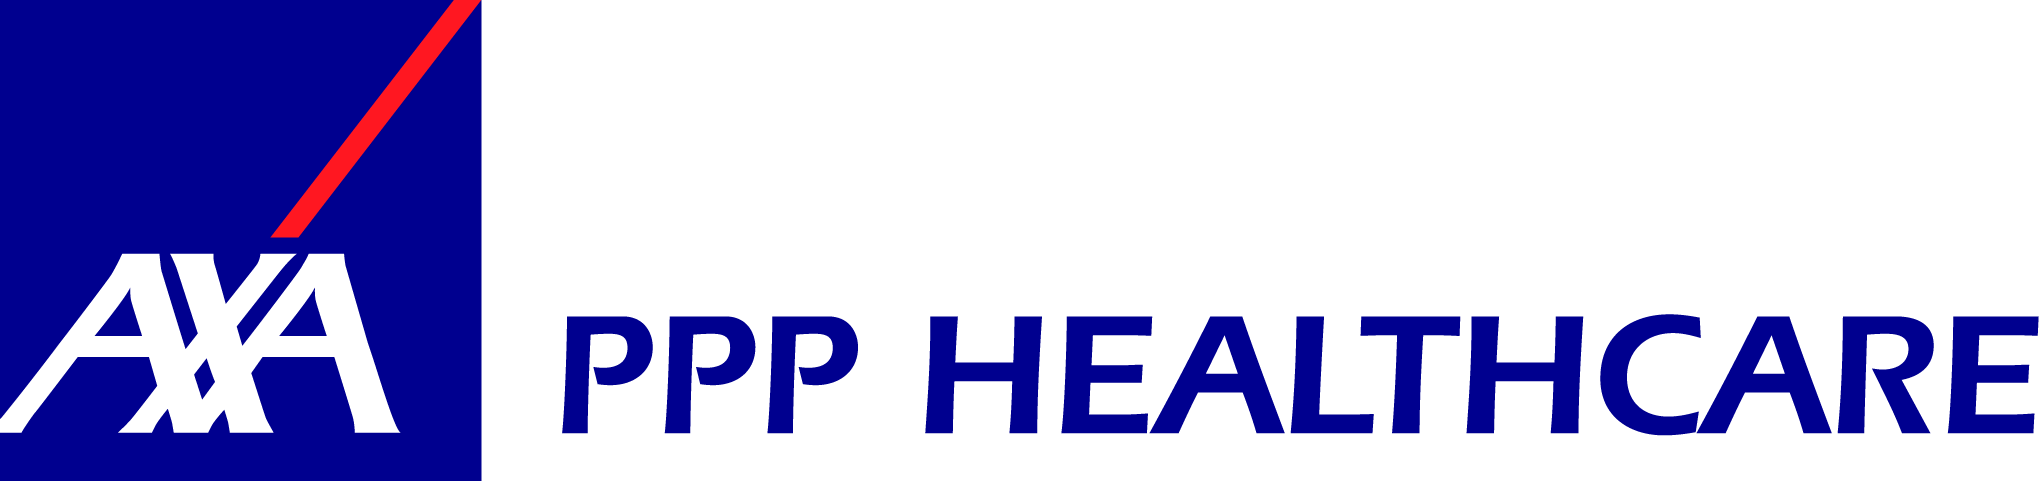 axa_ppp_healthcare_solid_rgb.png